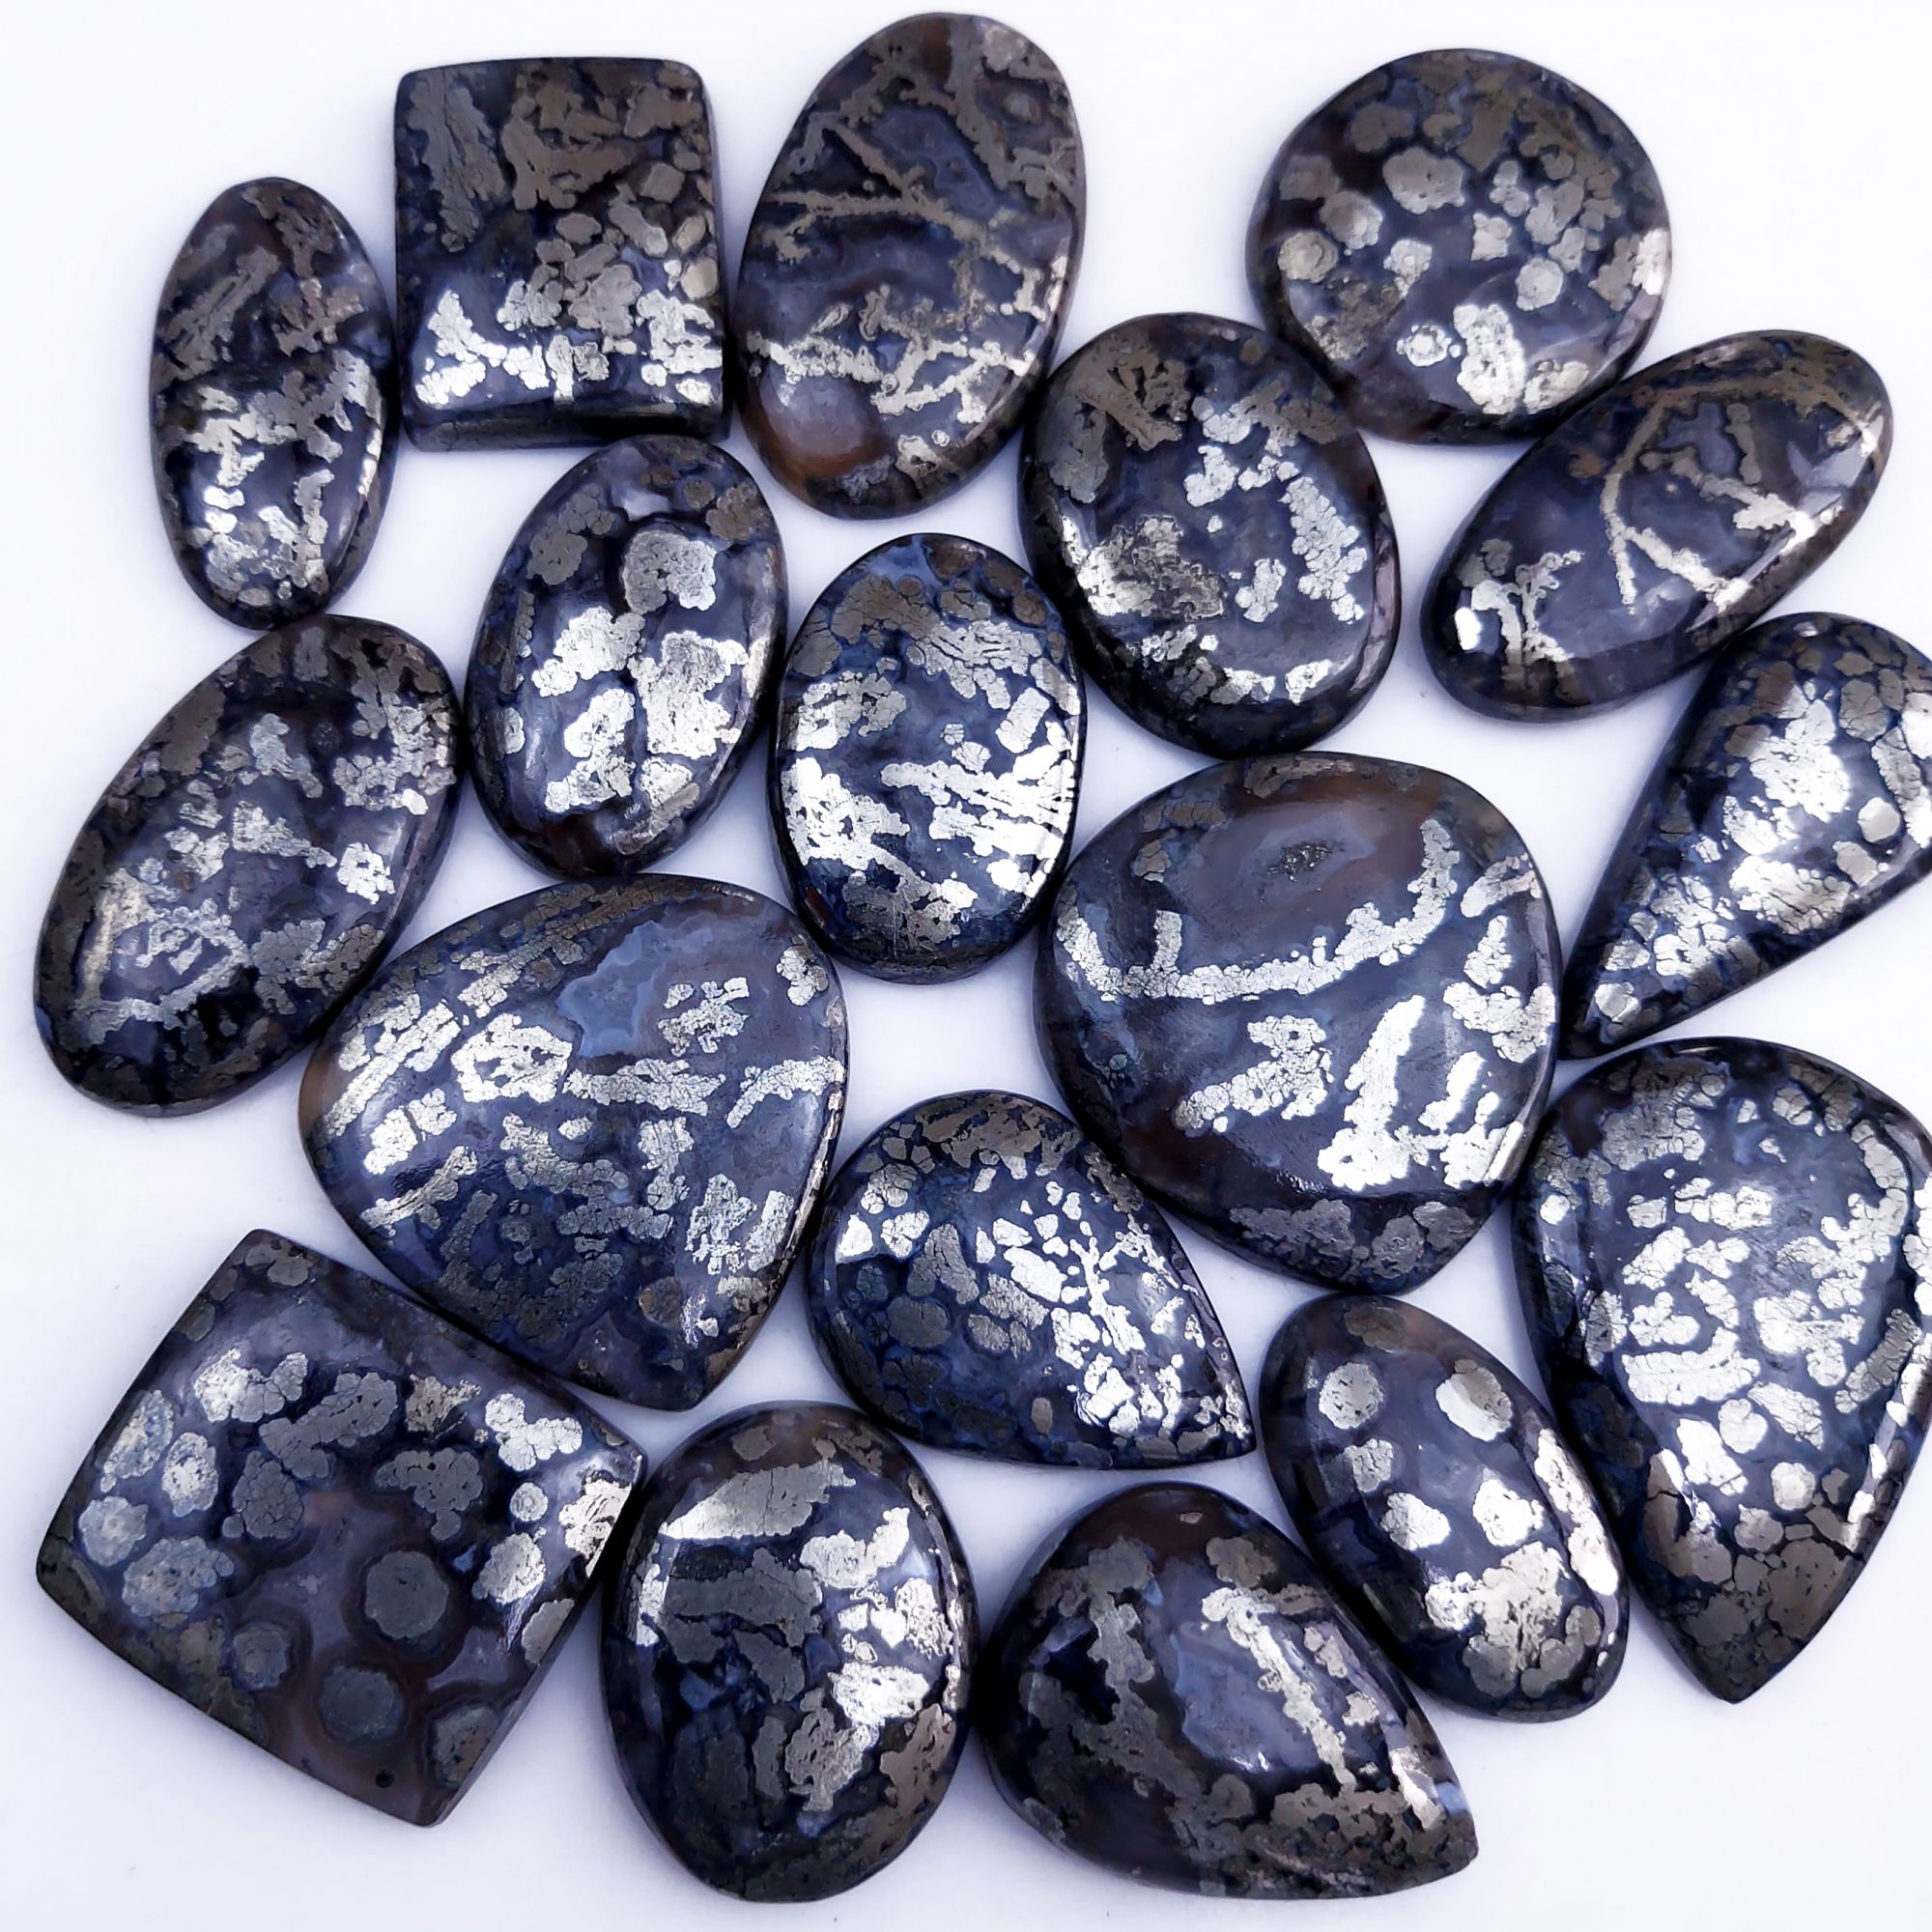 18Pcs 950Cts Natural Marcasite Grey Cabochon Back Side Unpolished Gemstone Semi-Precious Gemstones For Jewelry Making 40x30 30x20mm #10037